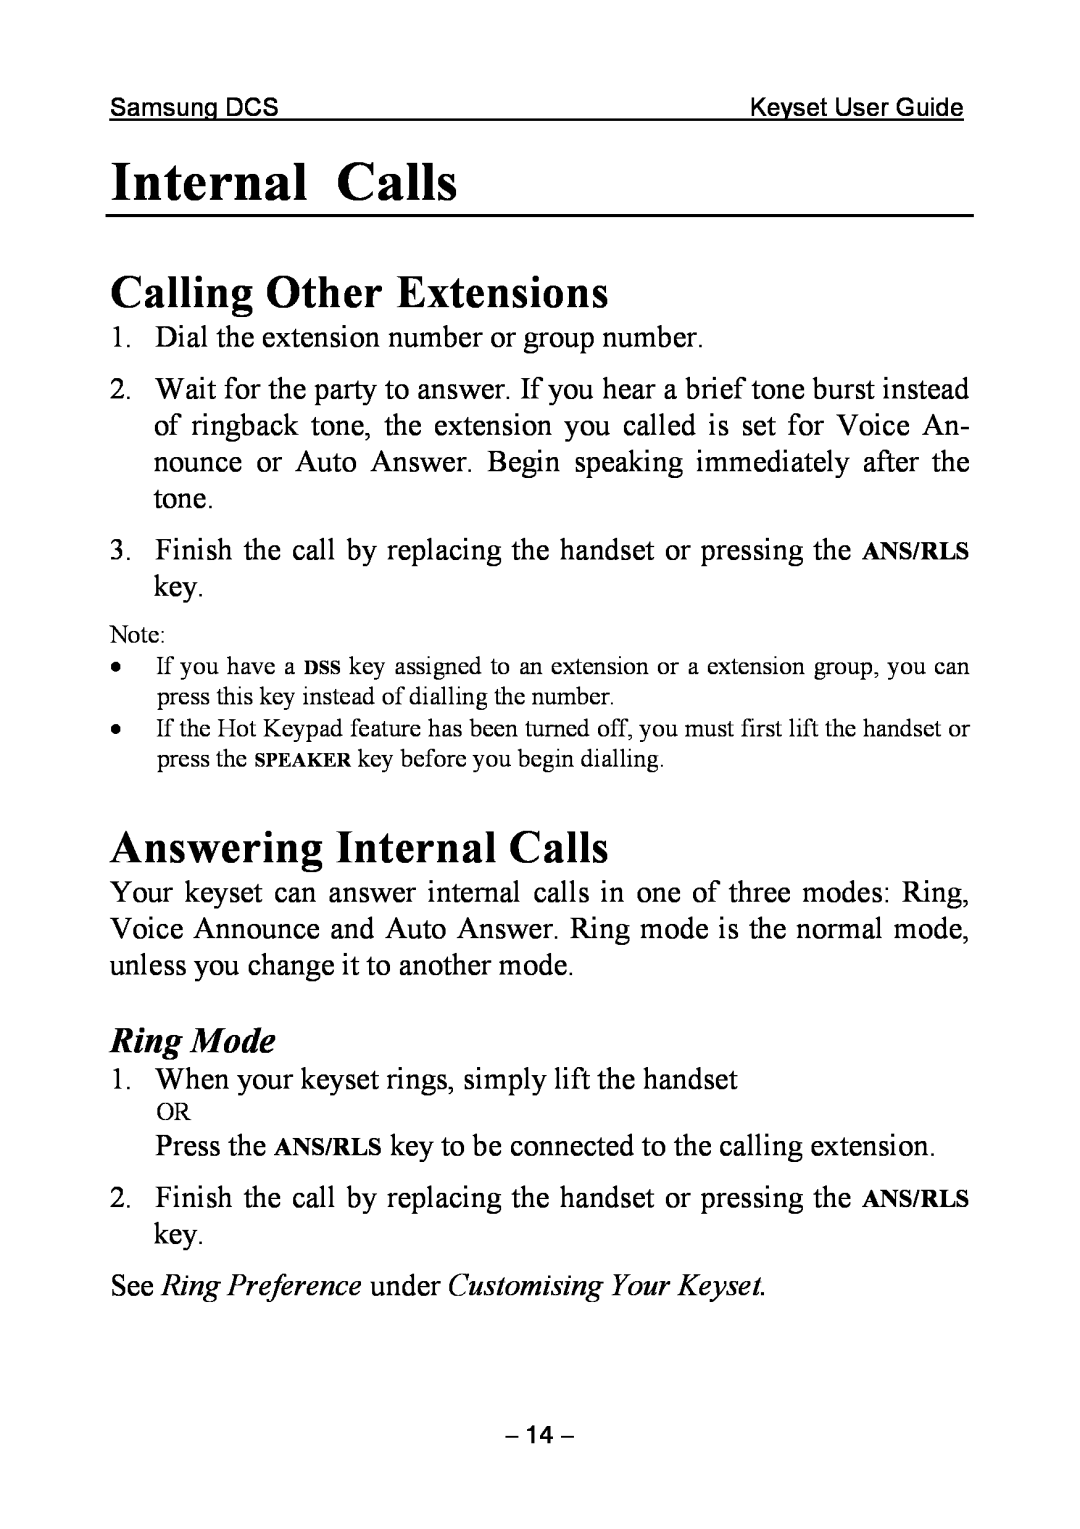 Samsung DCS KEYSET manual Calling Other Extensions, Answering Internal Calls, Ring Mode 